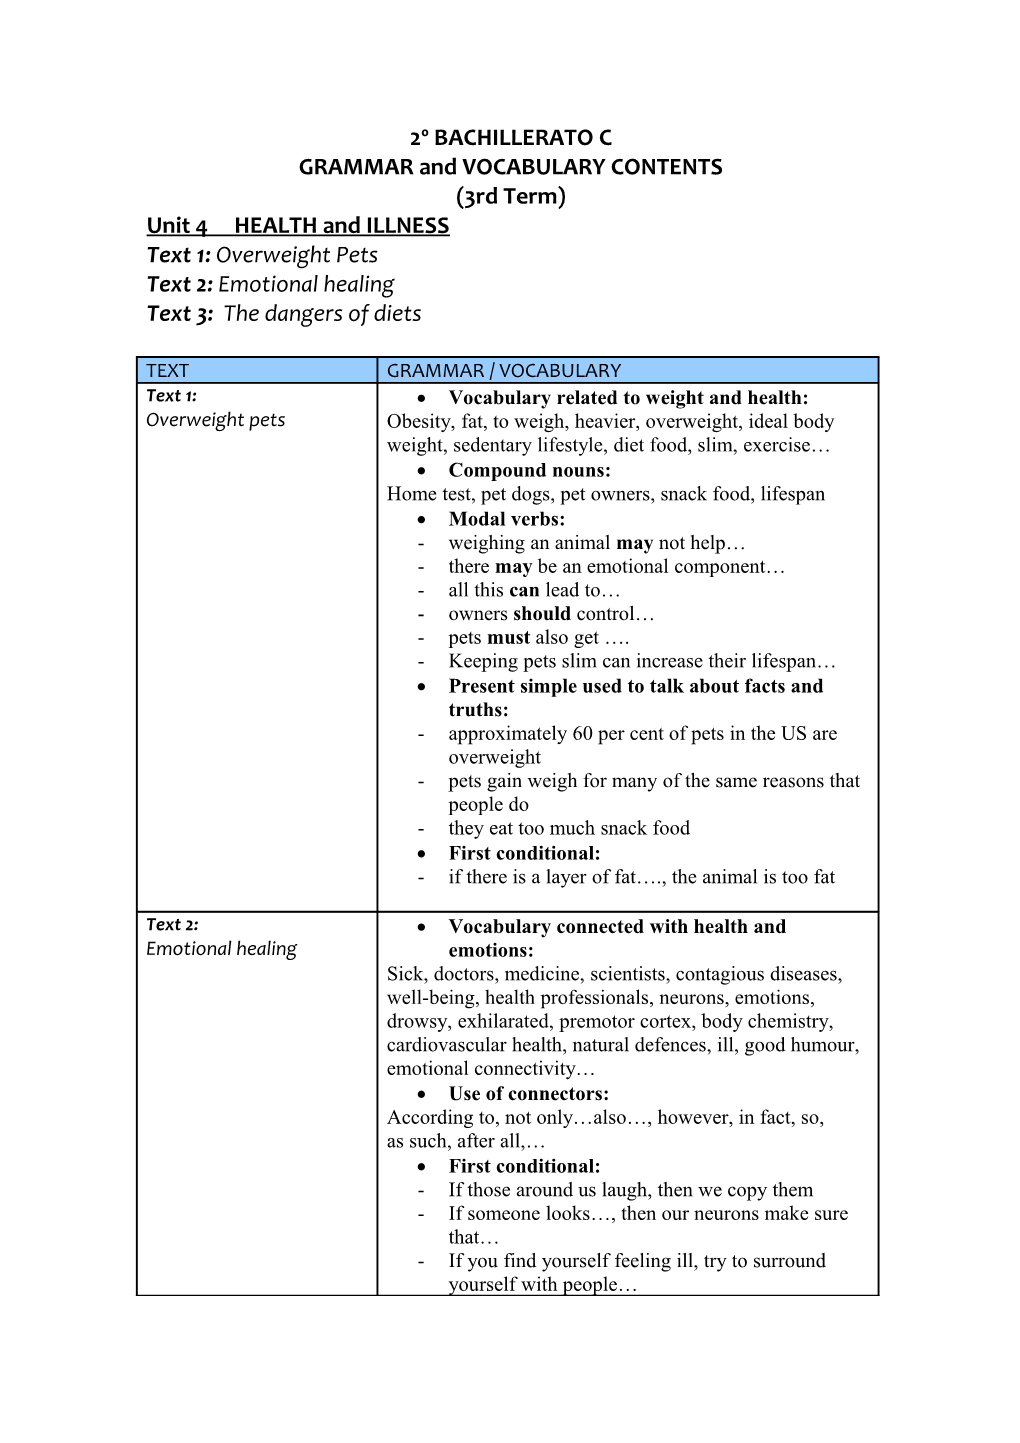 GRAMMAR and VOCABULARY CONTENTS